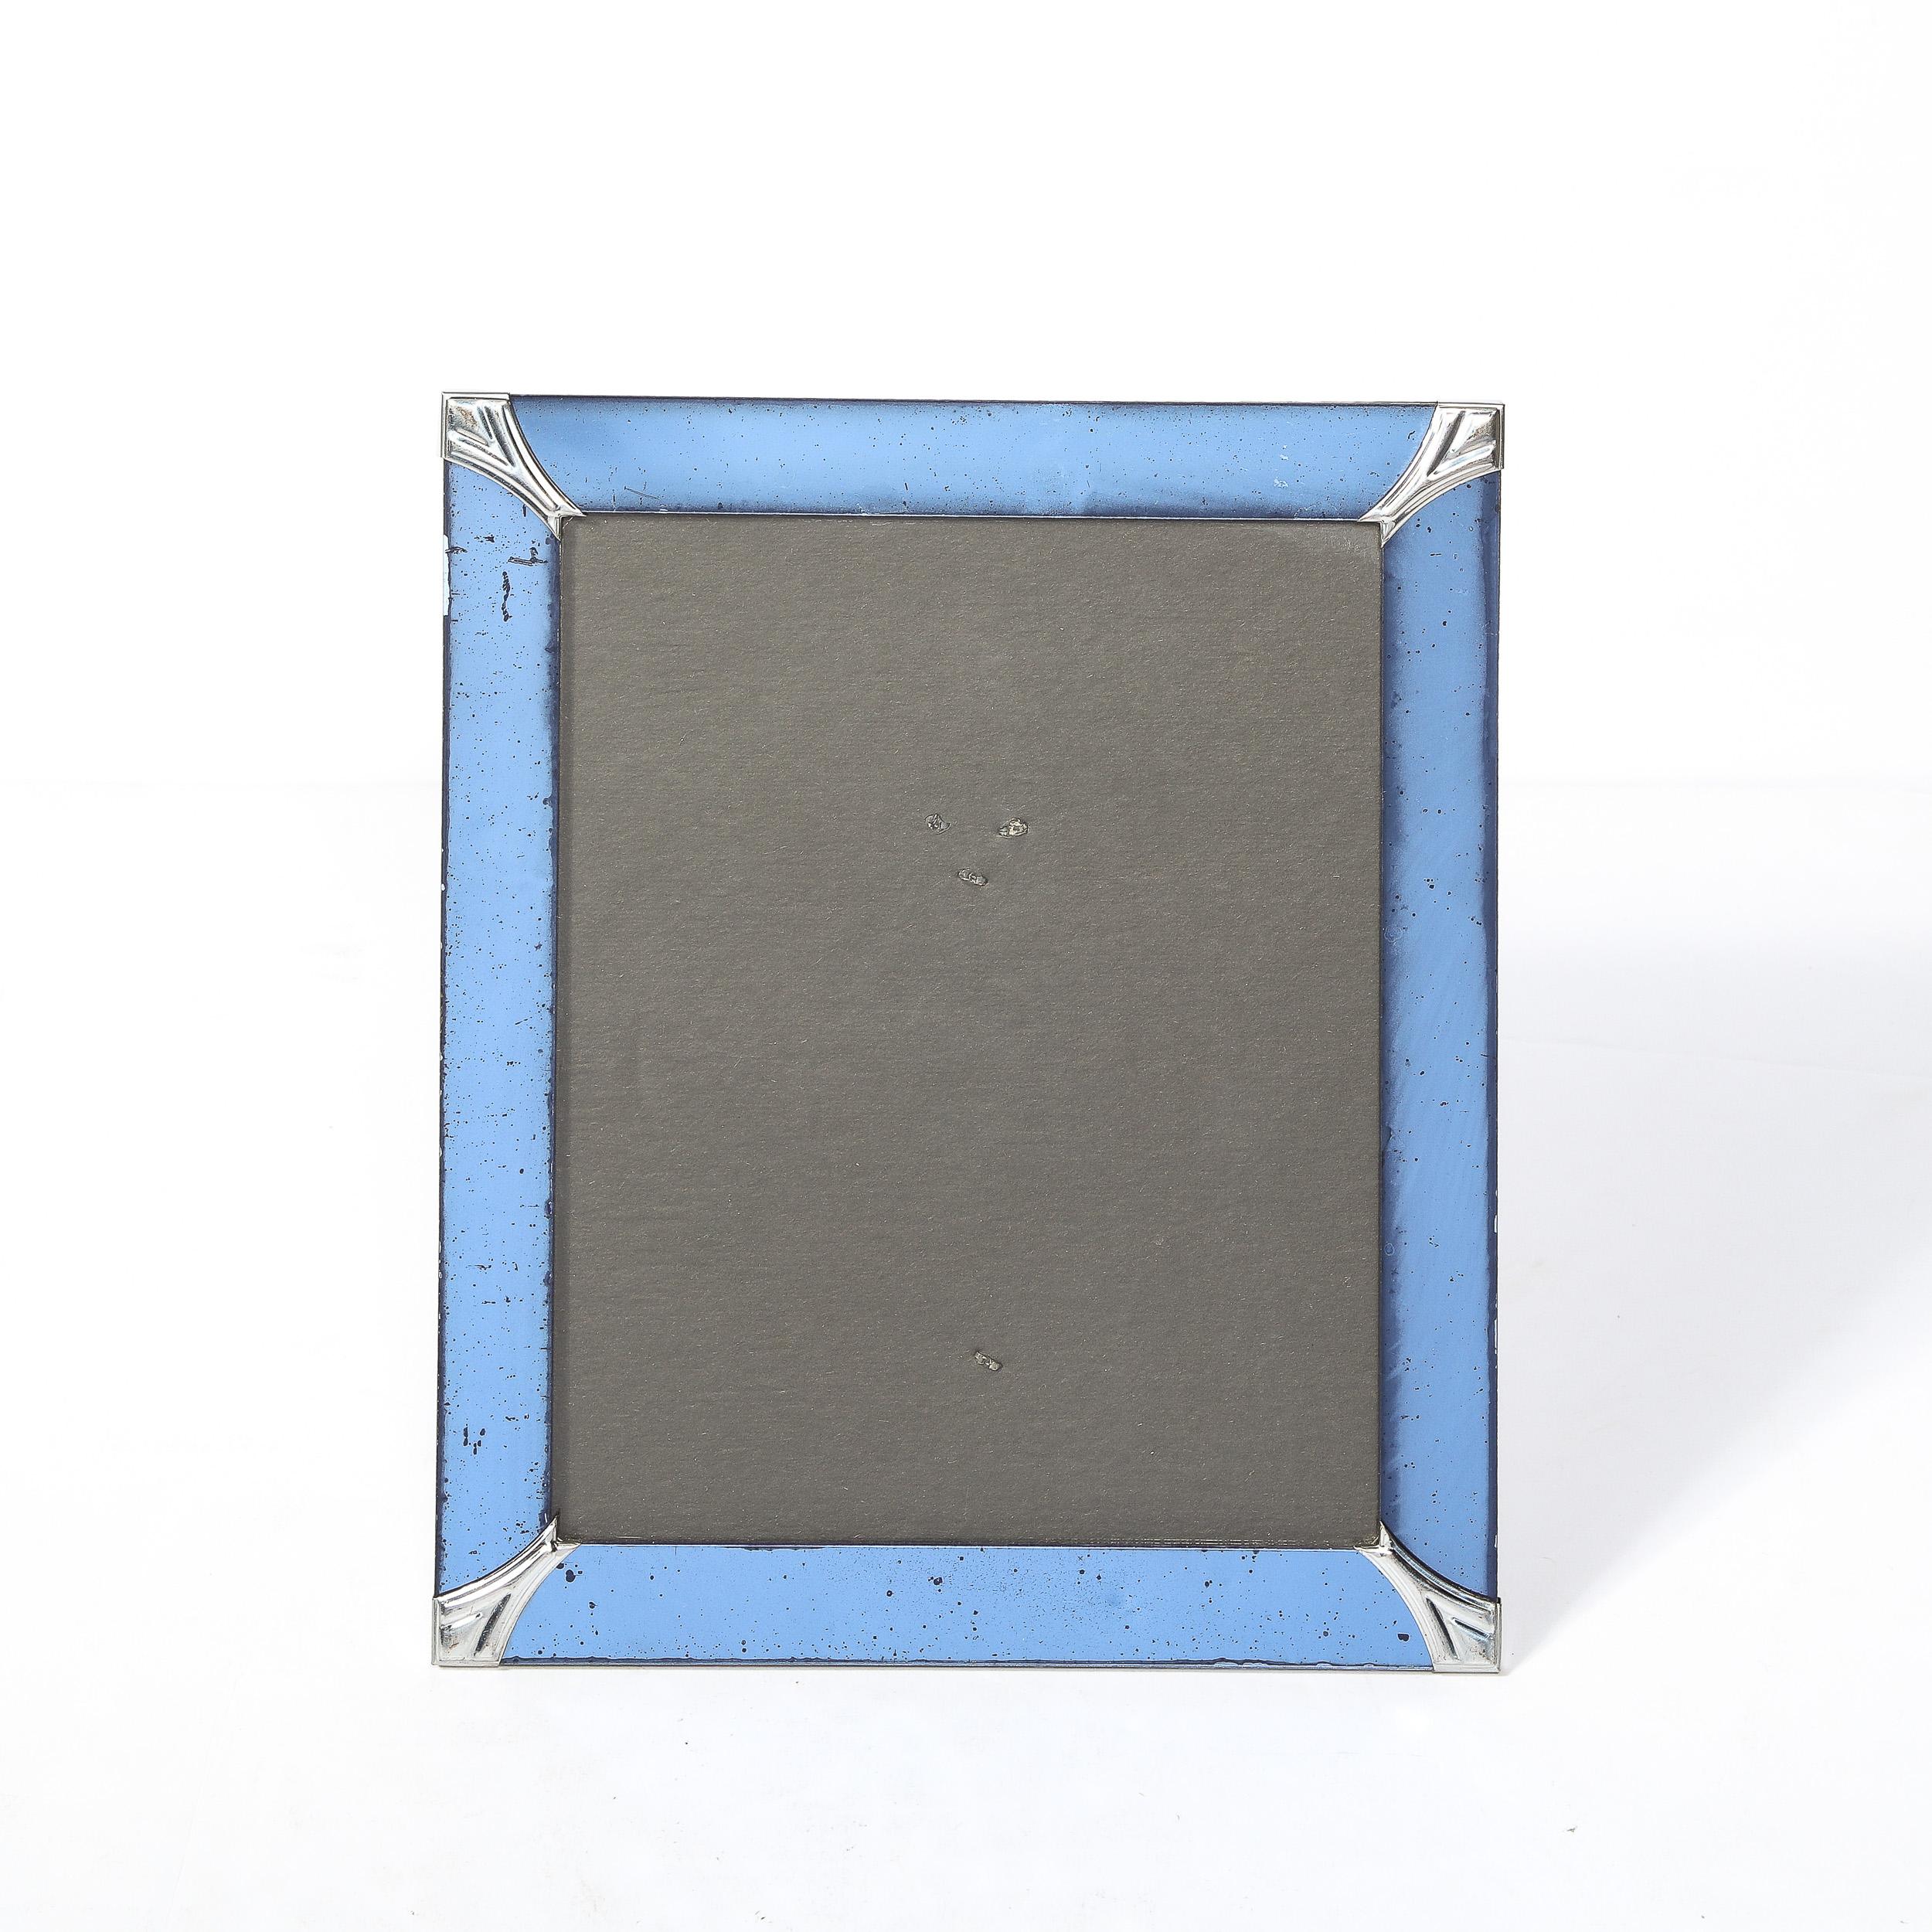 This Art Deco Picture Frame originates from the United States Circa 1935.  It is rendered in gorgeous cobalt blue glass characteristic of the era; beveled detailing on the outside edges, streamlined polished chrome corners expand from the inner